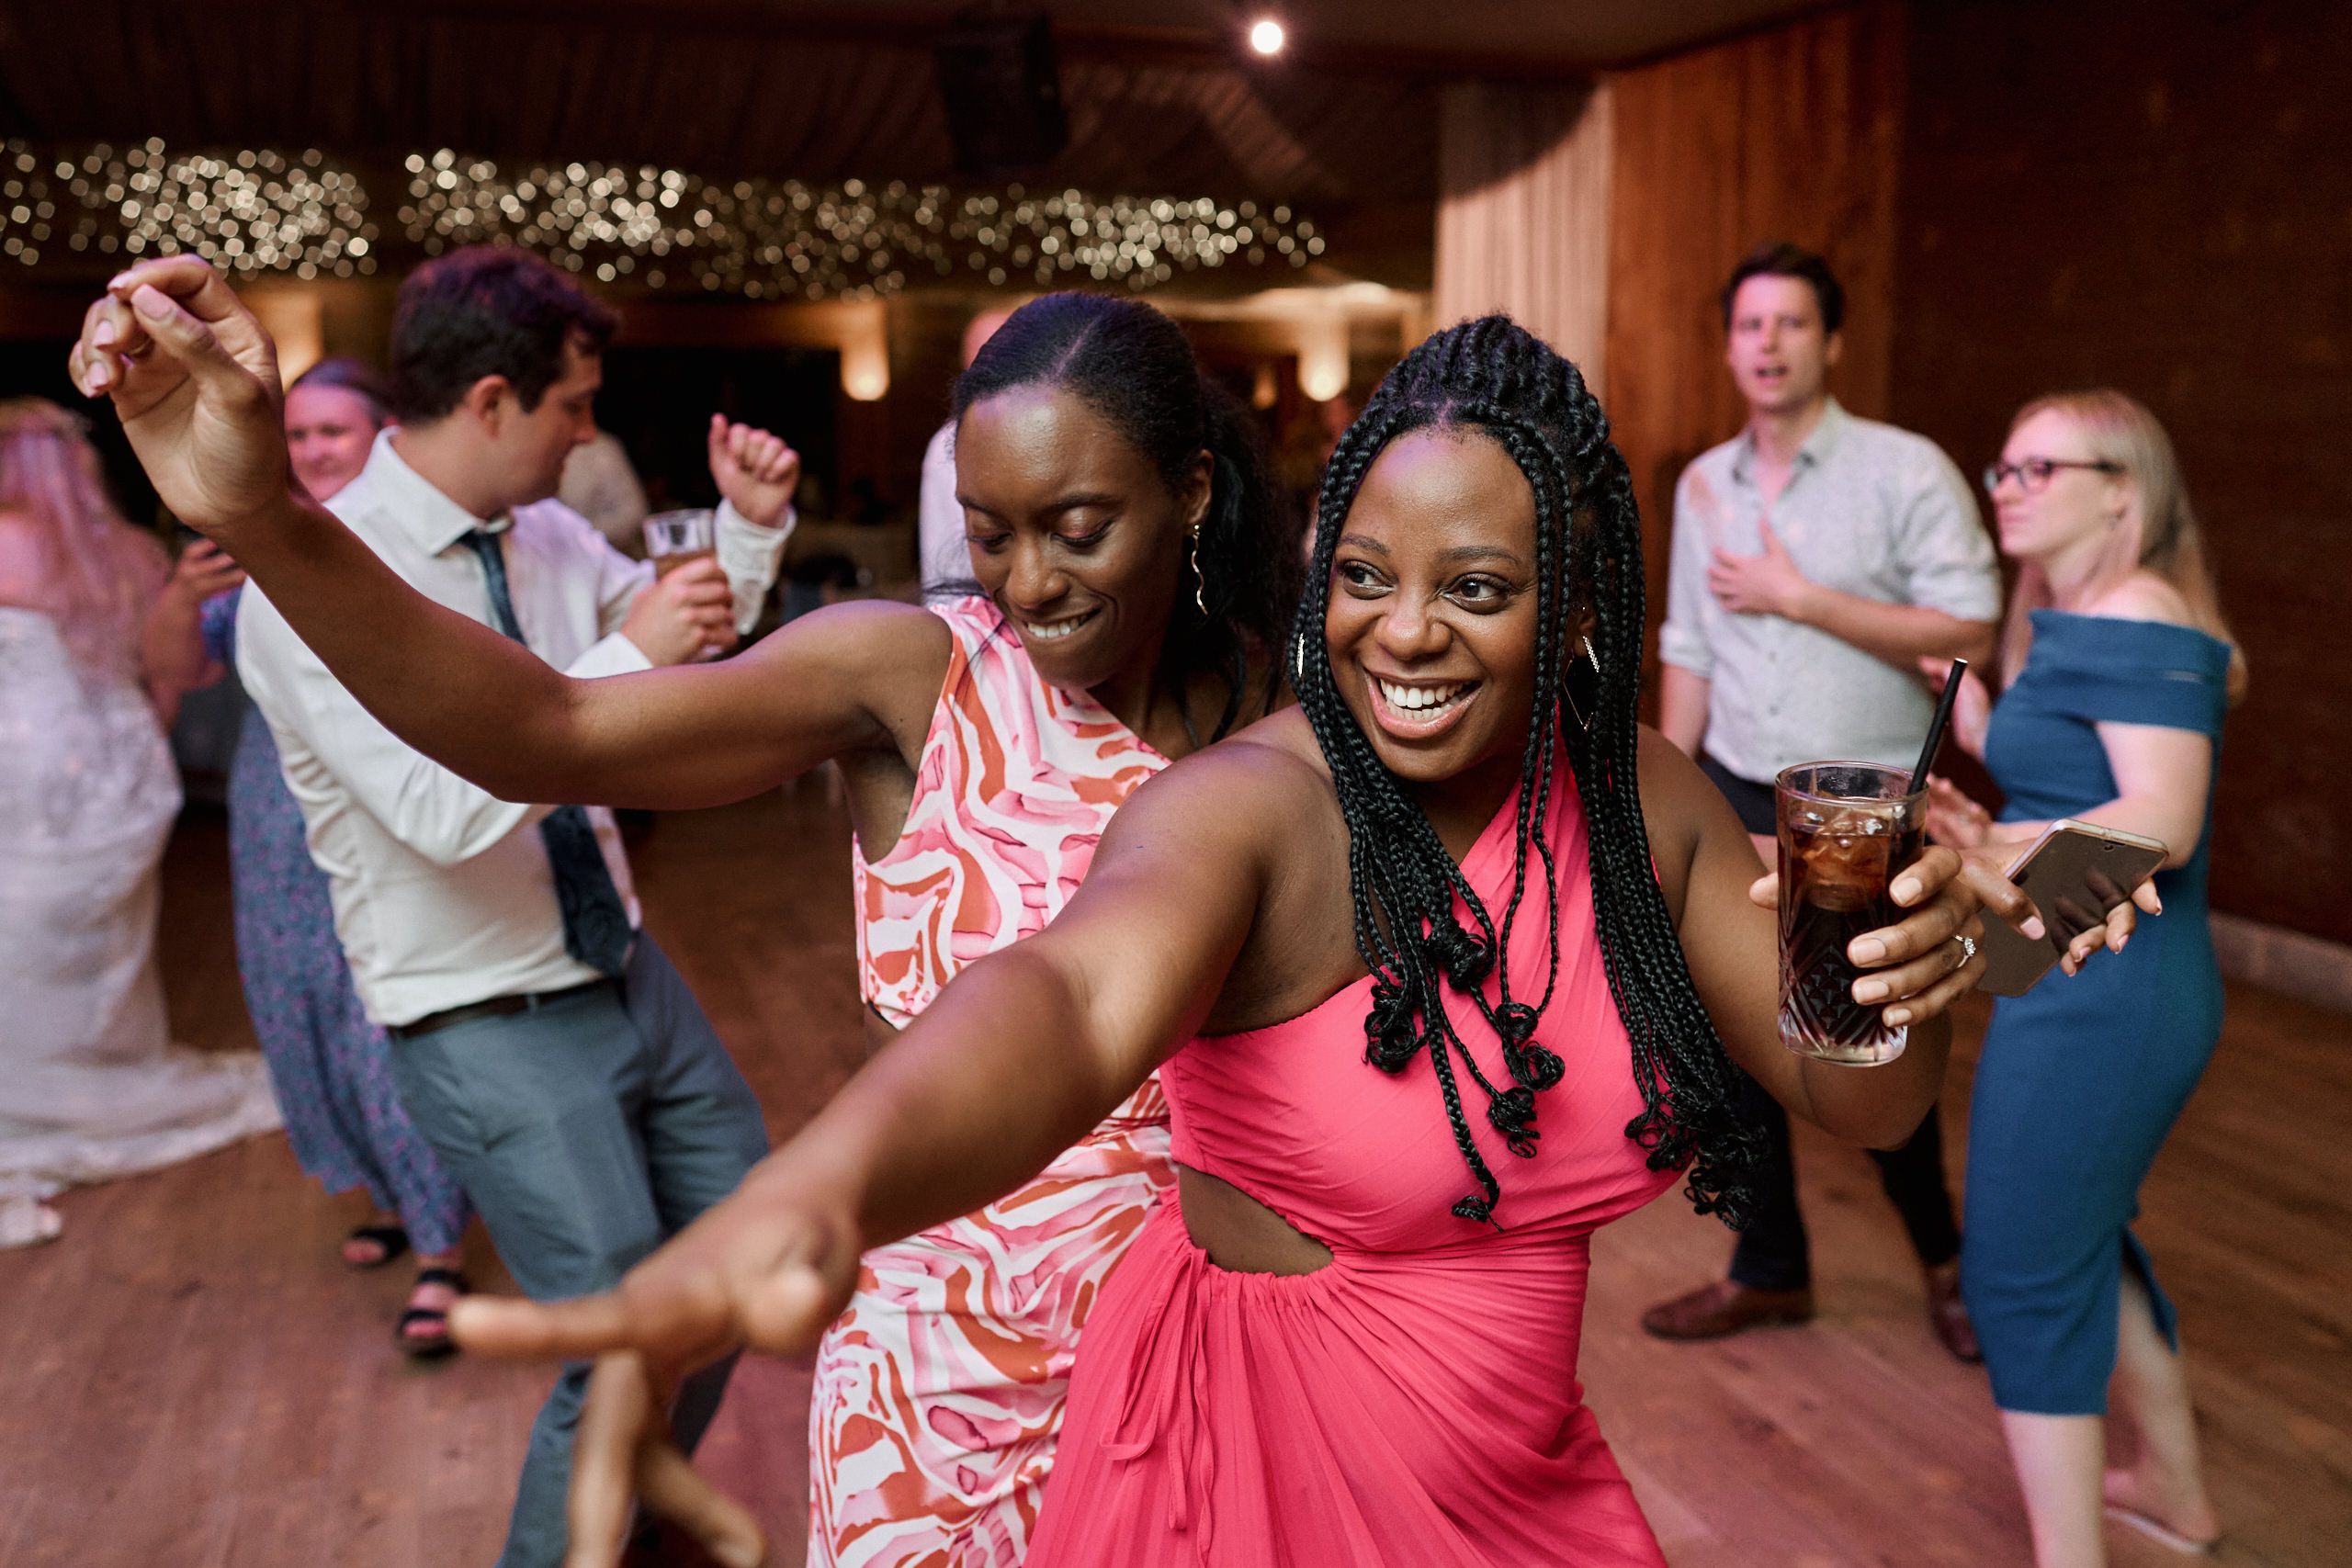 Two ladies are busting some moves on the dance floor at a wedding.